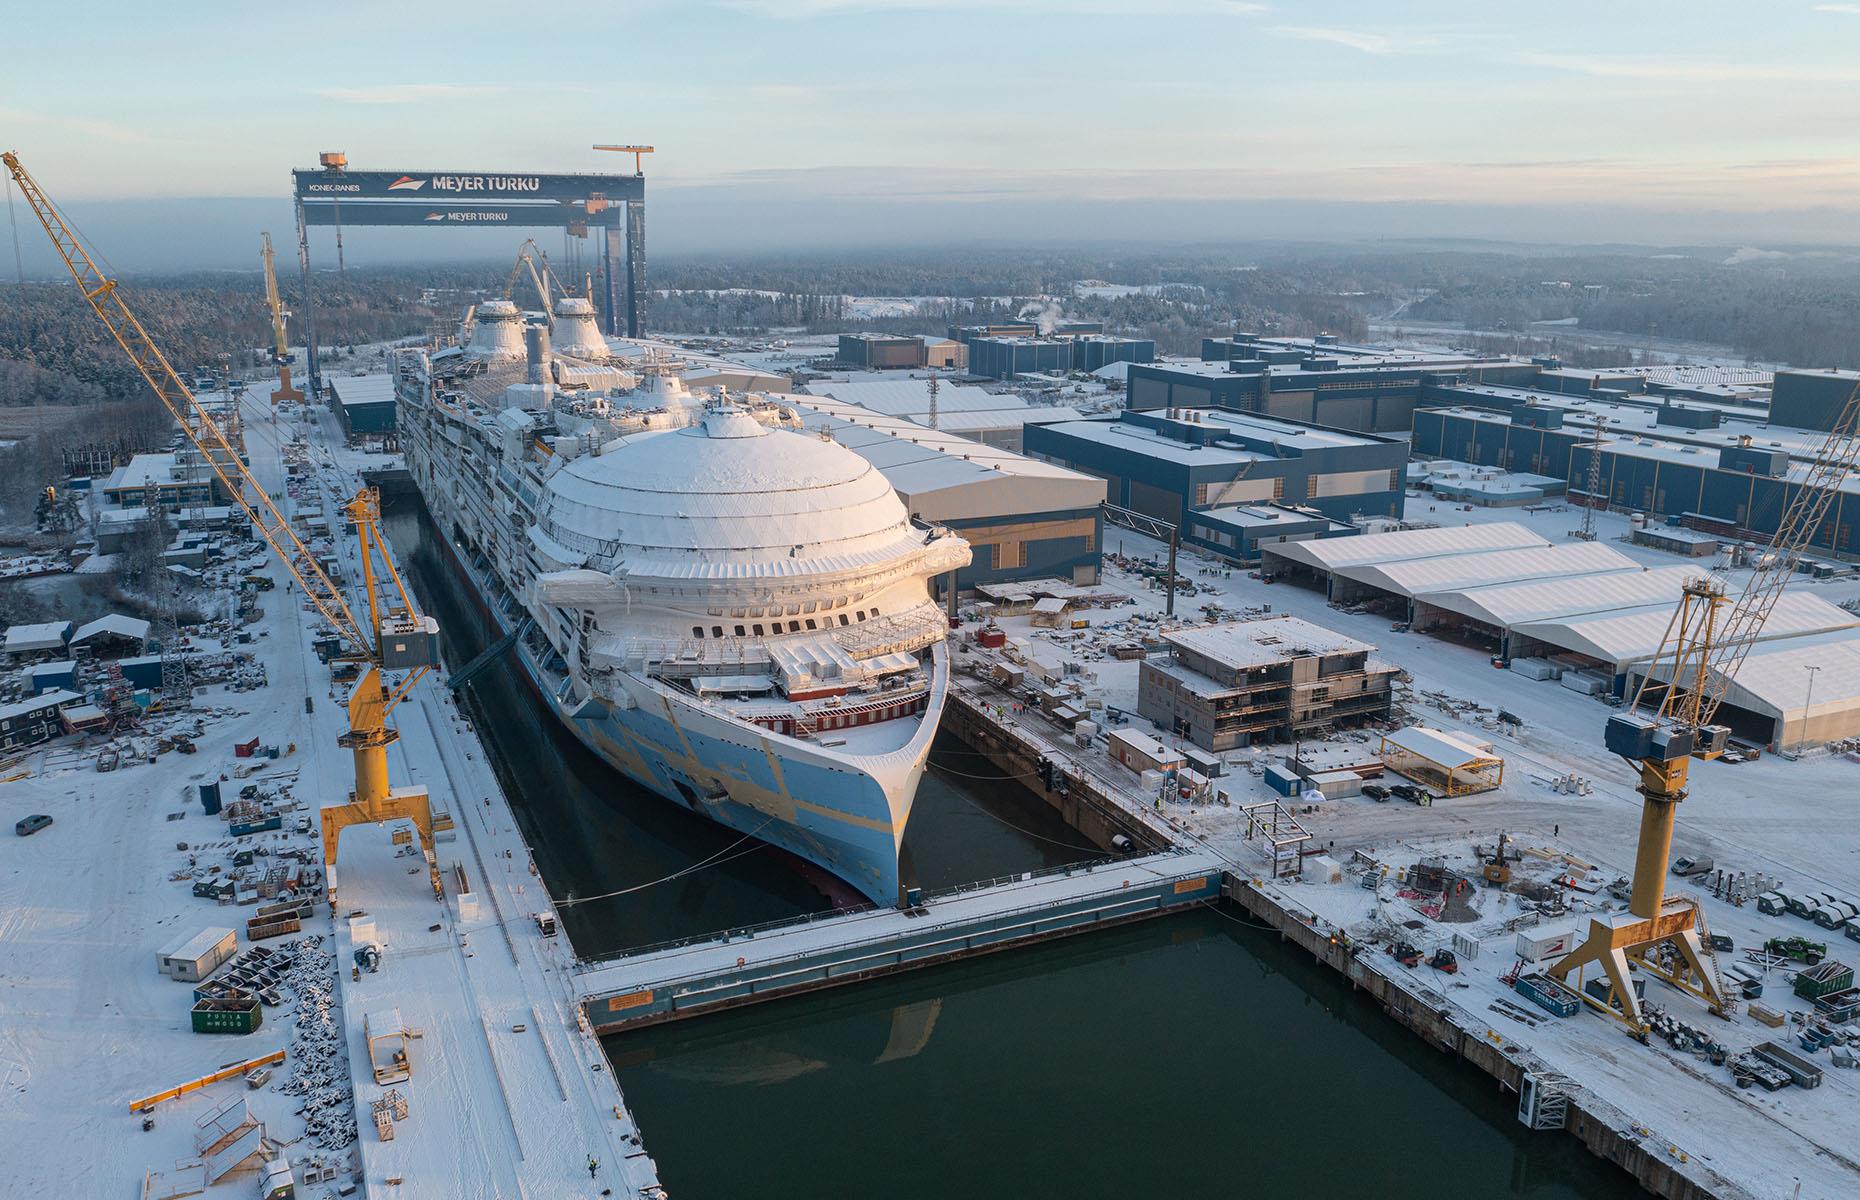 <p>Construction on <em>Icon of the Seas </em>began in 2021 at the Meyer Turku shipyard in Finland.</p>  <p>The juggernaut vessel is almost 1,200 feet long and weighs a staggering 250,800 gross tons, surpassing the measurements of all other cruise ships to date. To put that into some kind of perspective, <em>Icon</em> is around five times larger than the <em>Titanic</em>.</p>  <p>Unsurprisingly, its construction price tag was a dizzying $2 billion.</p>